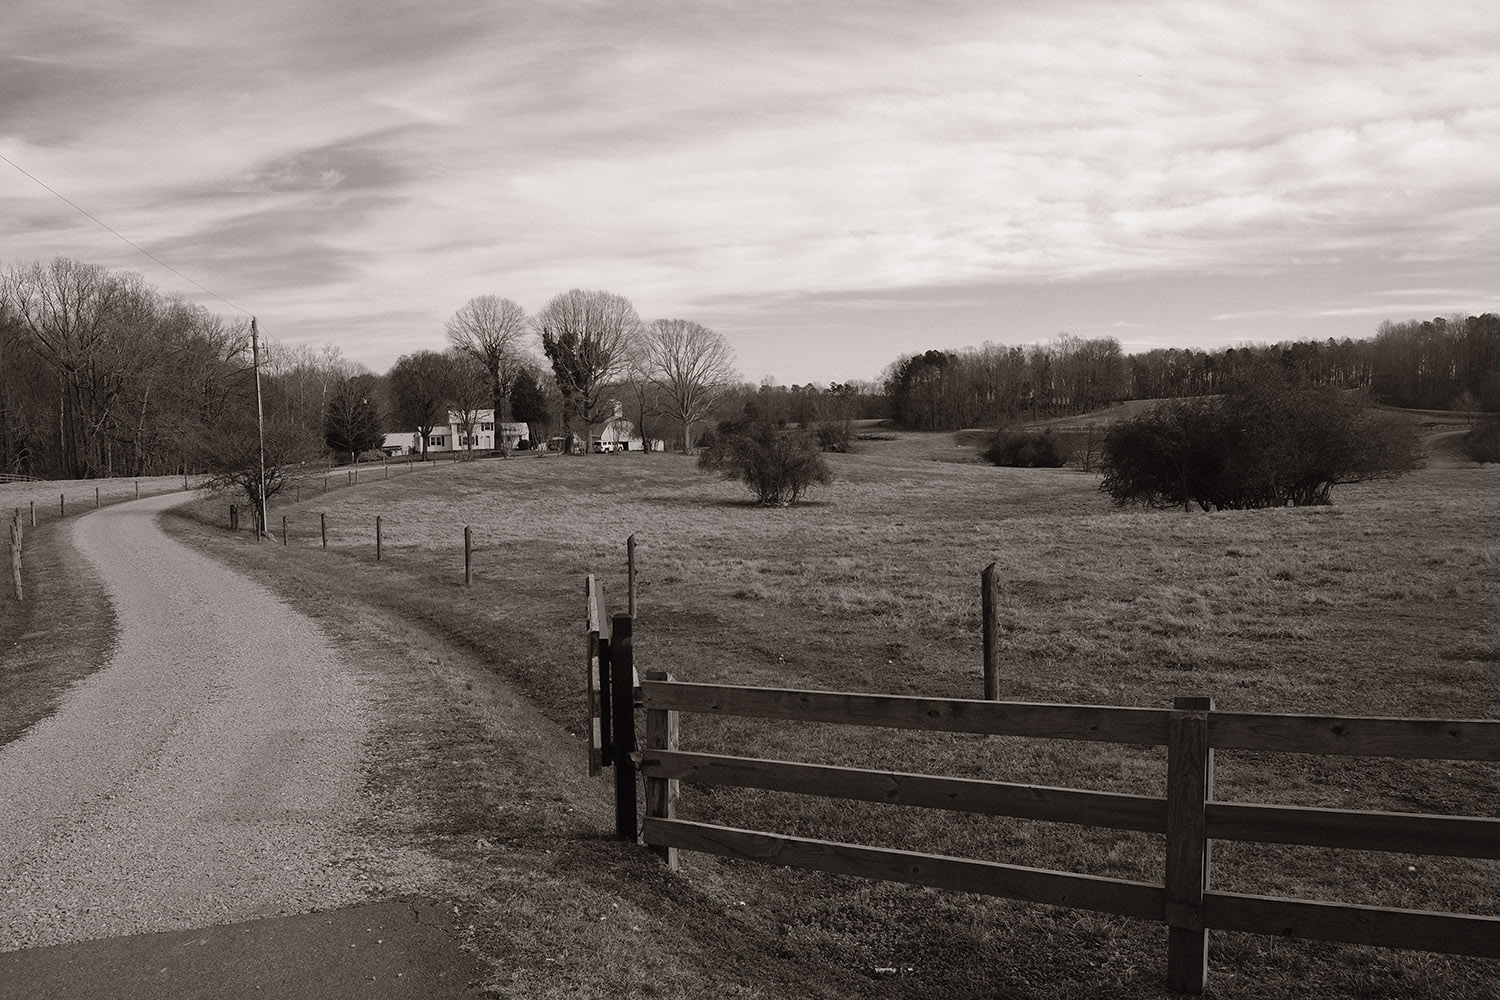 Driveway, Acros + Red Filter simulation